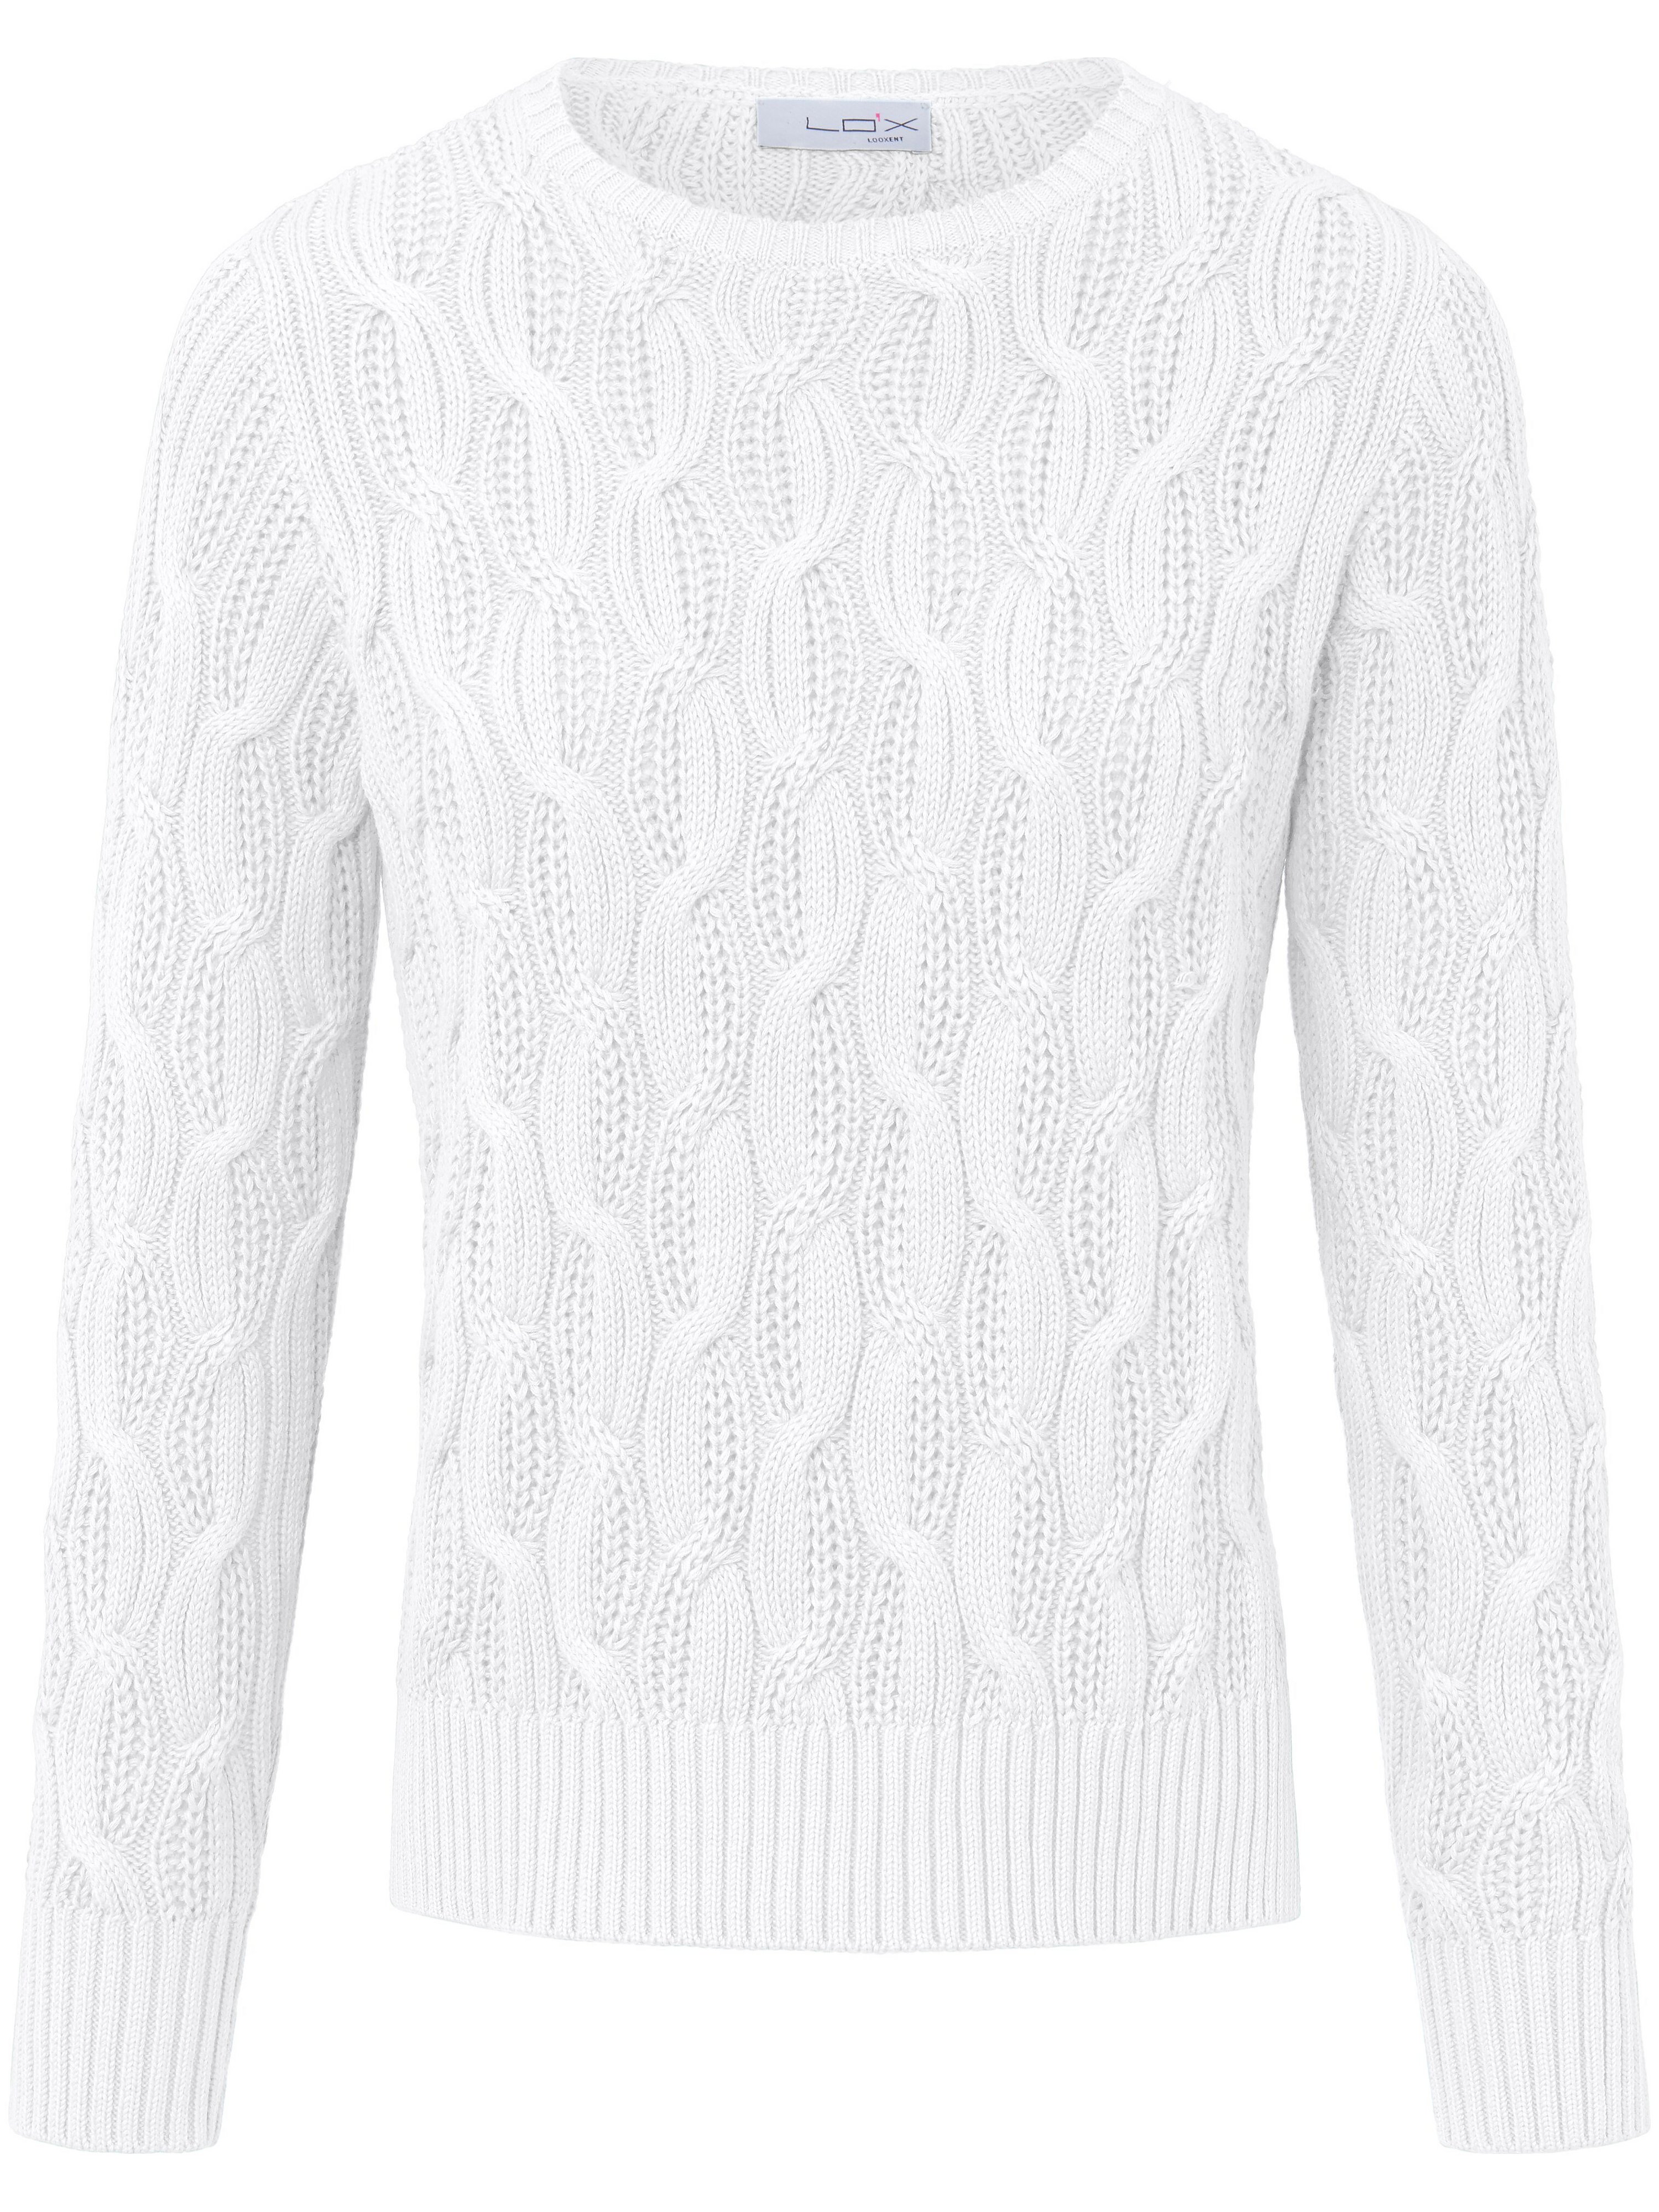 Le pull 100% coton  Looxent blanc taille 48